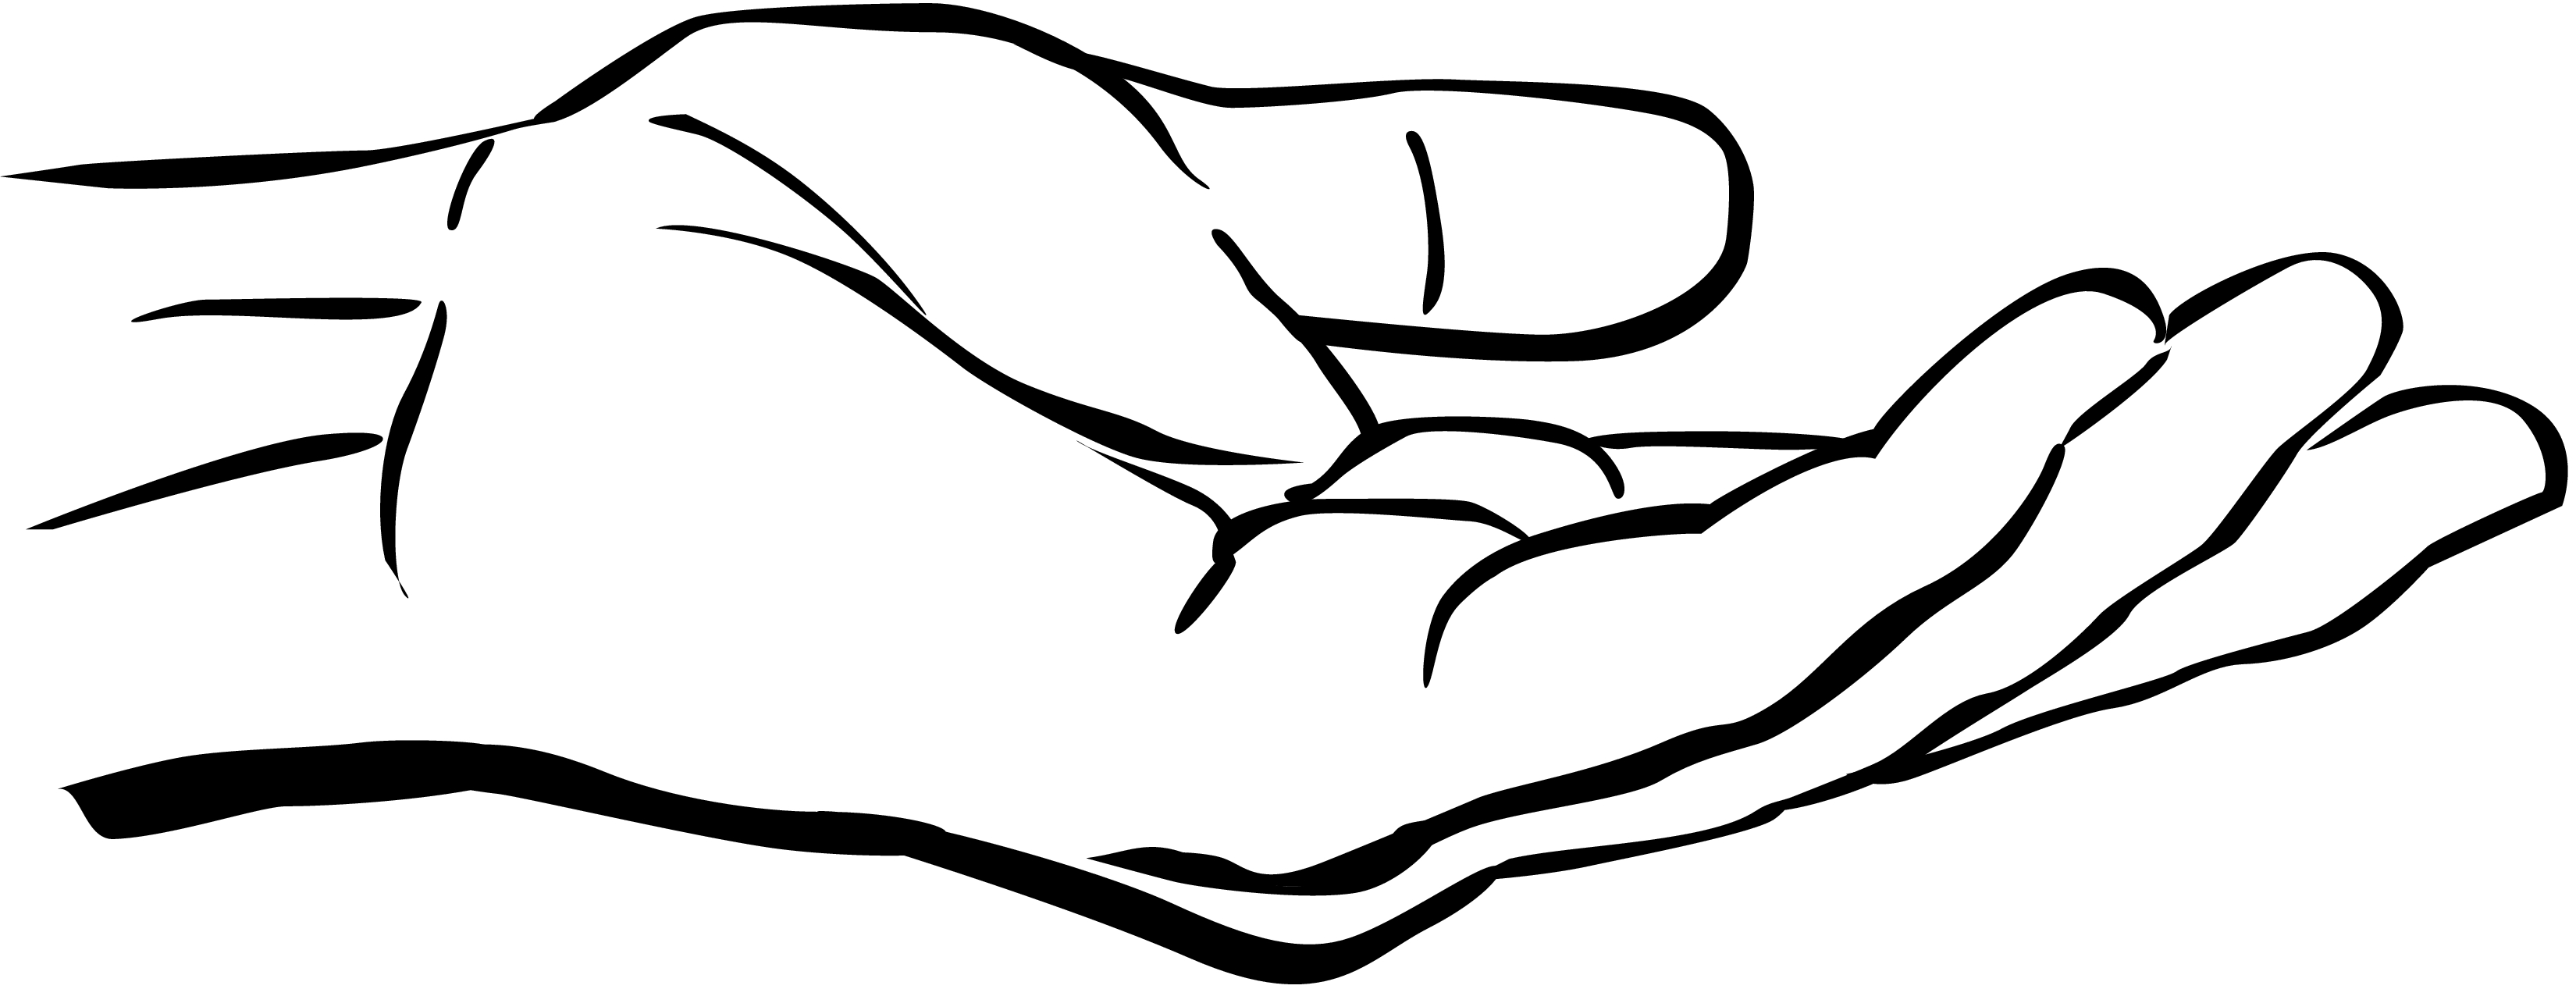 Picture Of Right Hand | Free Download Clip Art | Free Clip Art ...